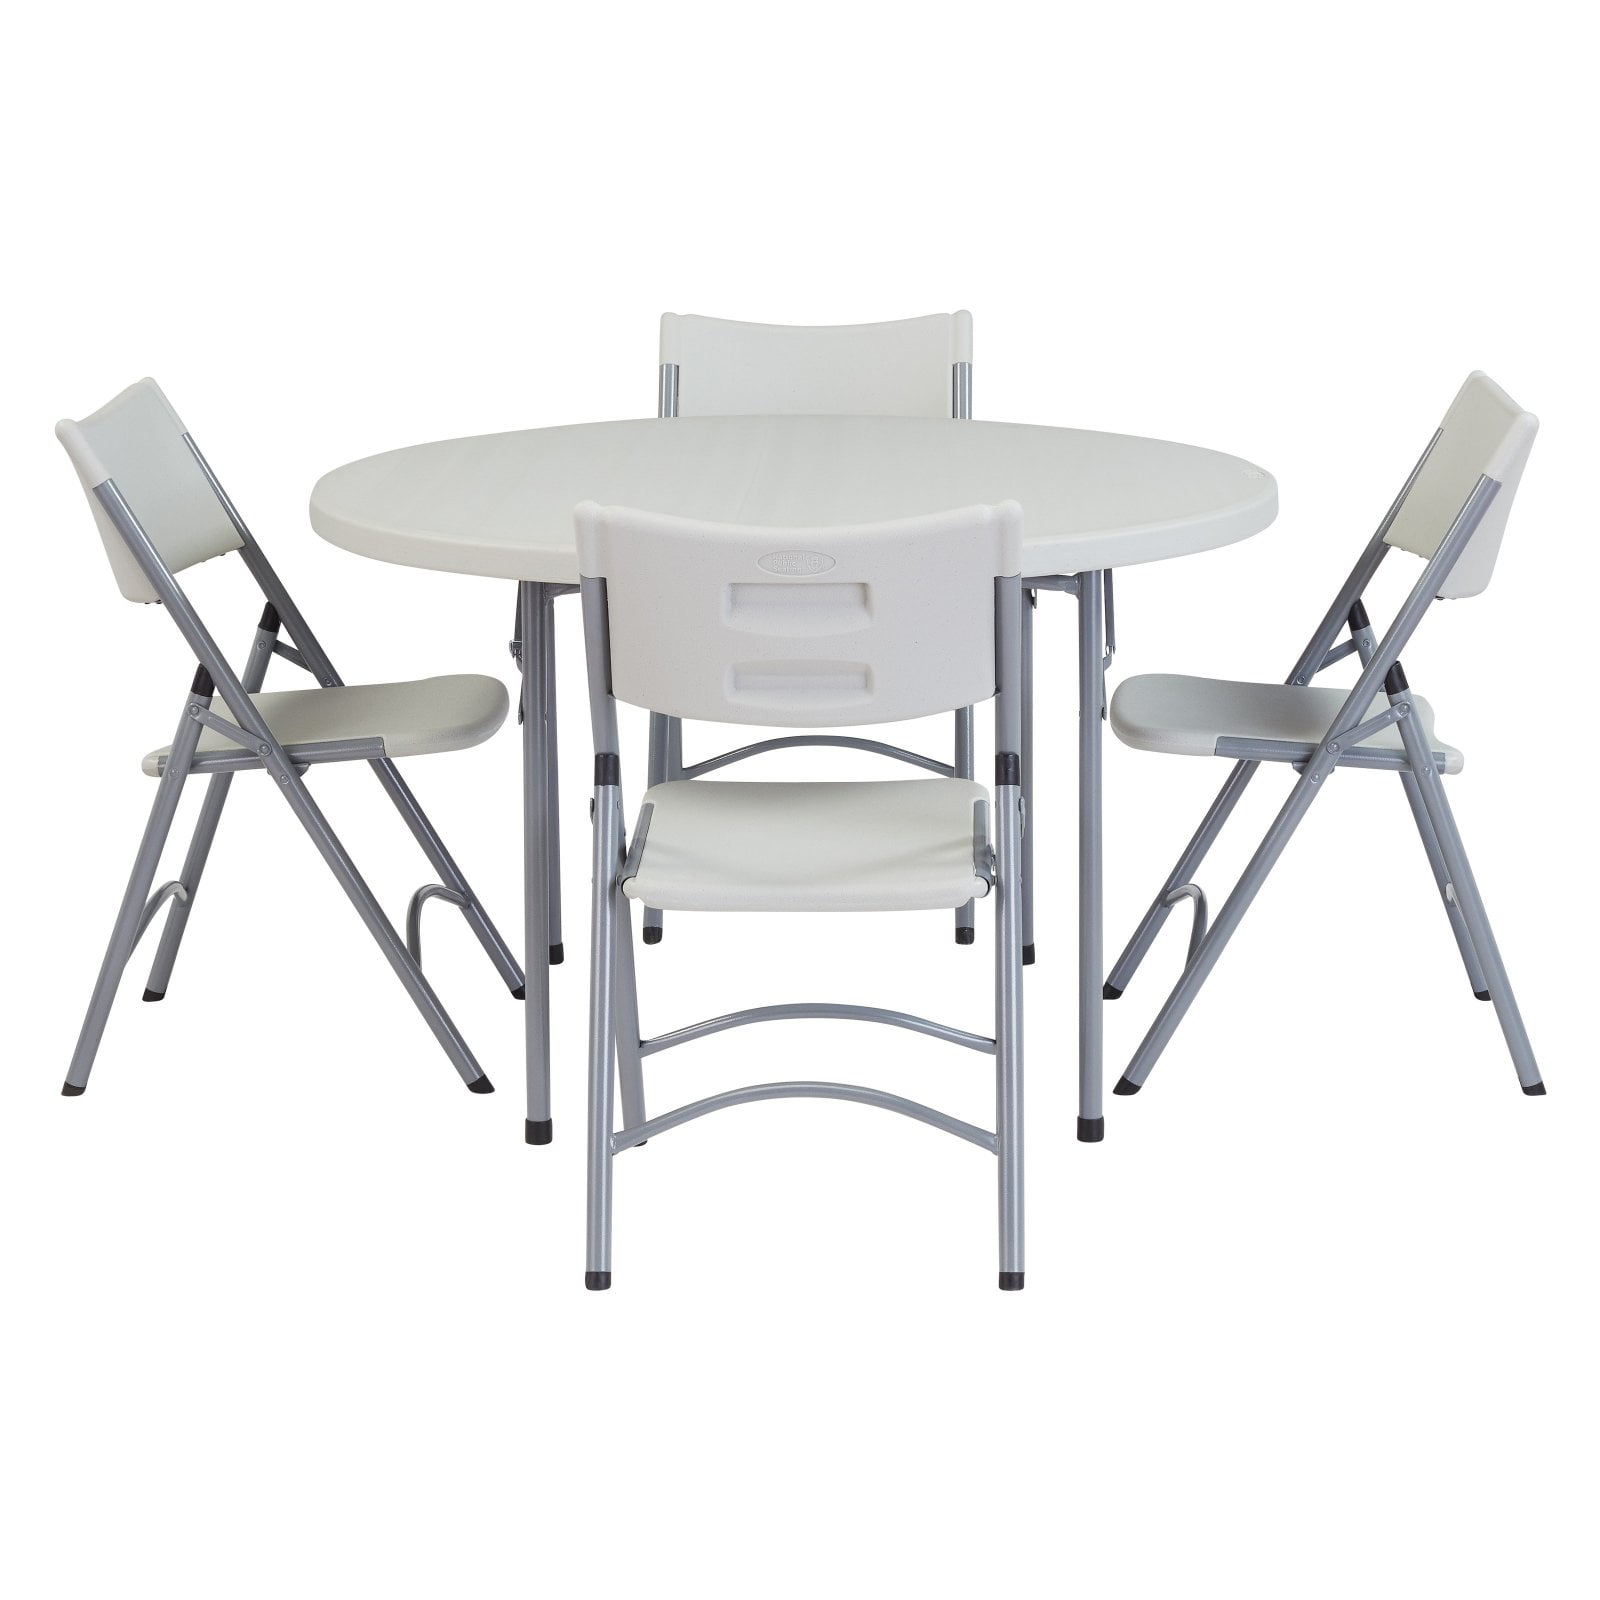 National Public Seating 4 Ft. Round Heavy Duty Folding Table And 4